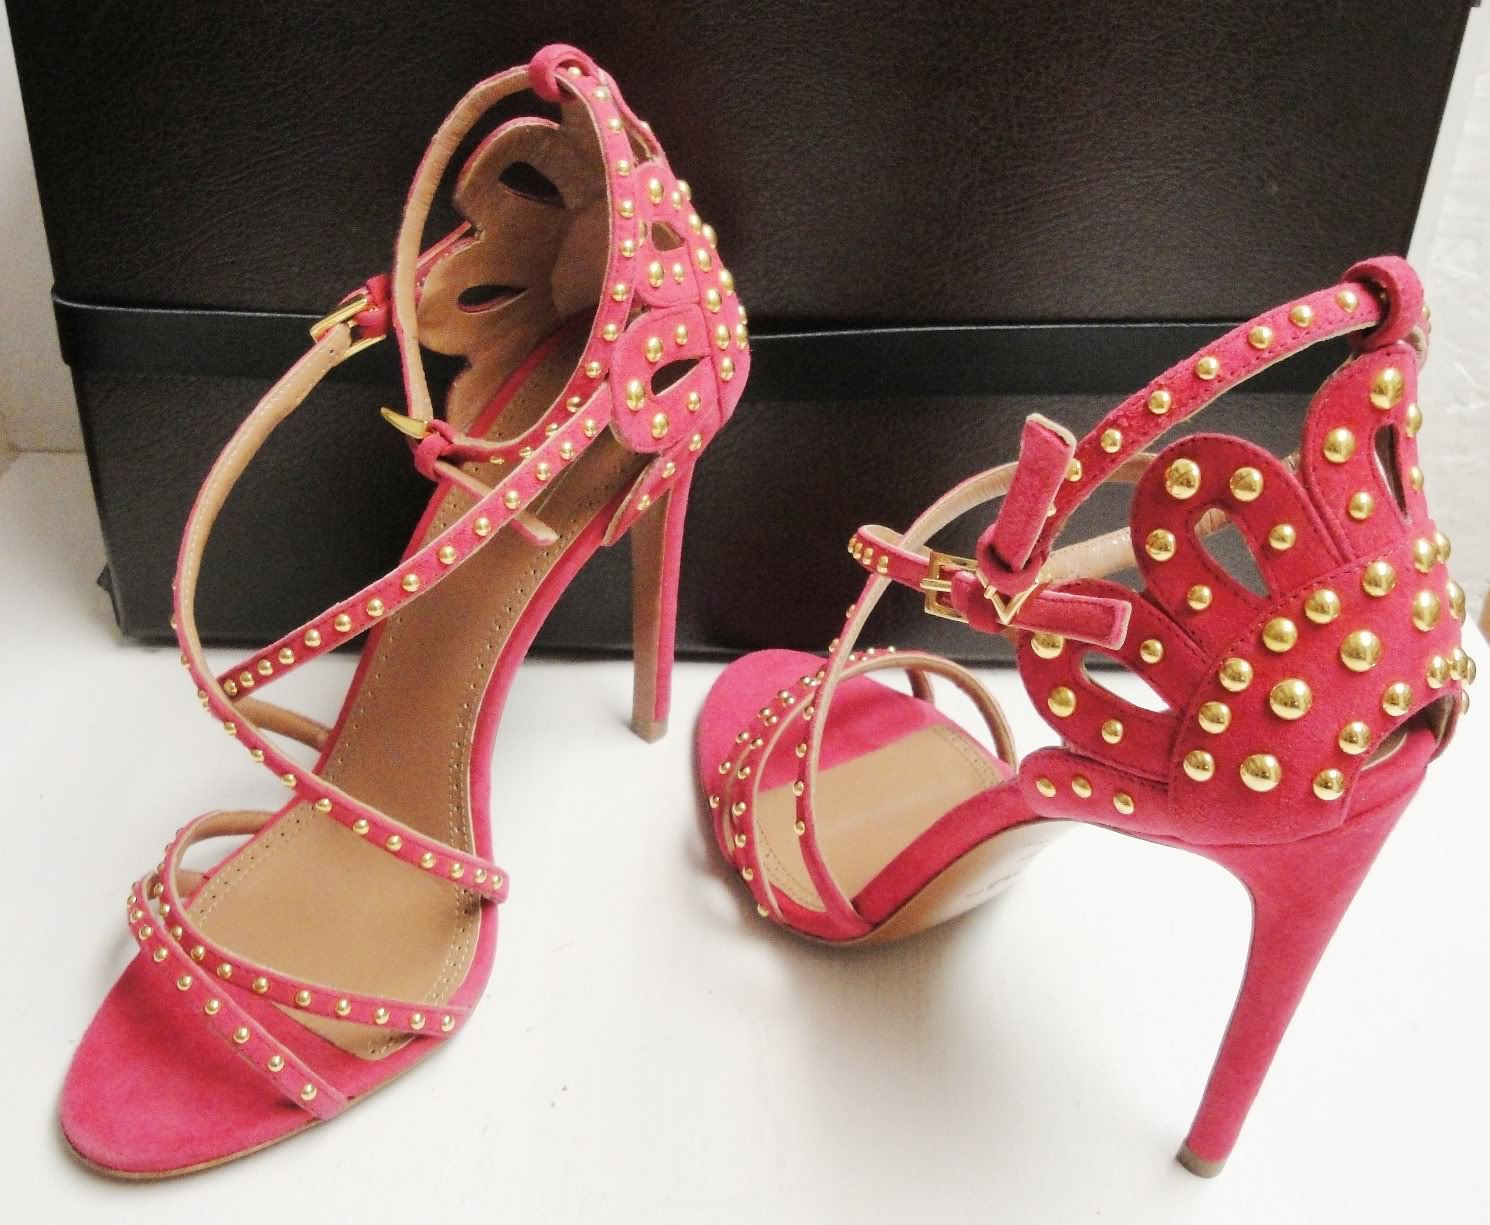 ALAIA Pink Suede Studded Strappy Open Toe Heels Sandals